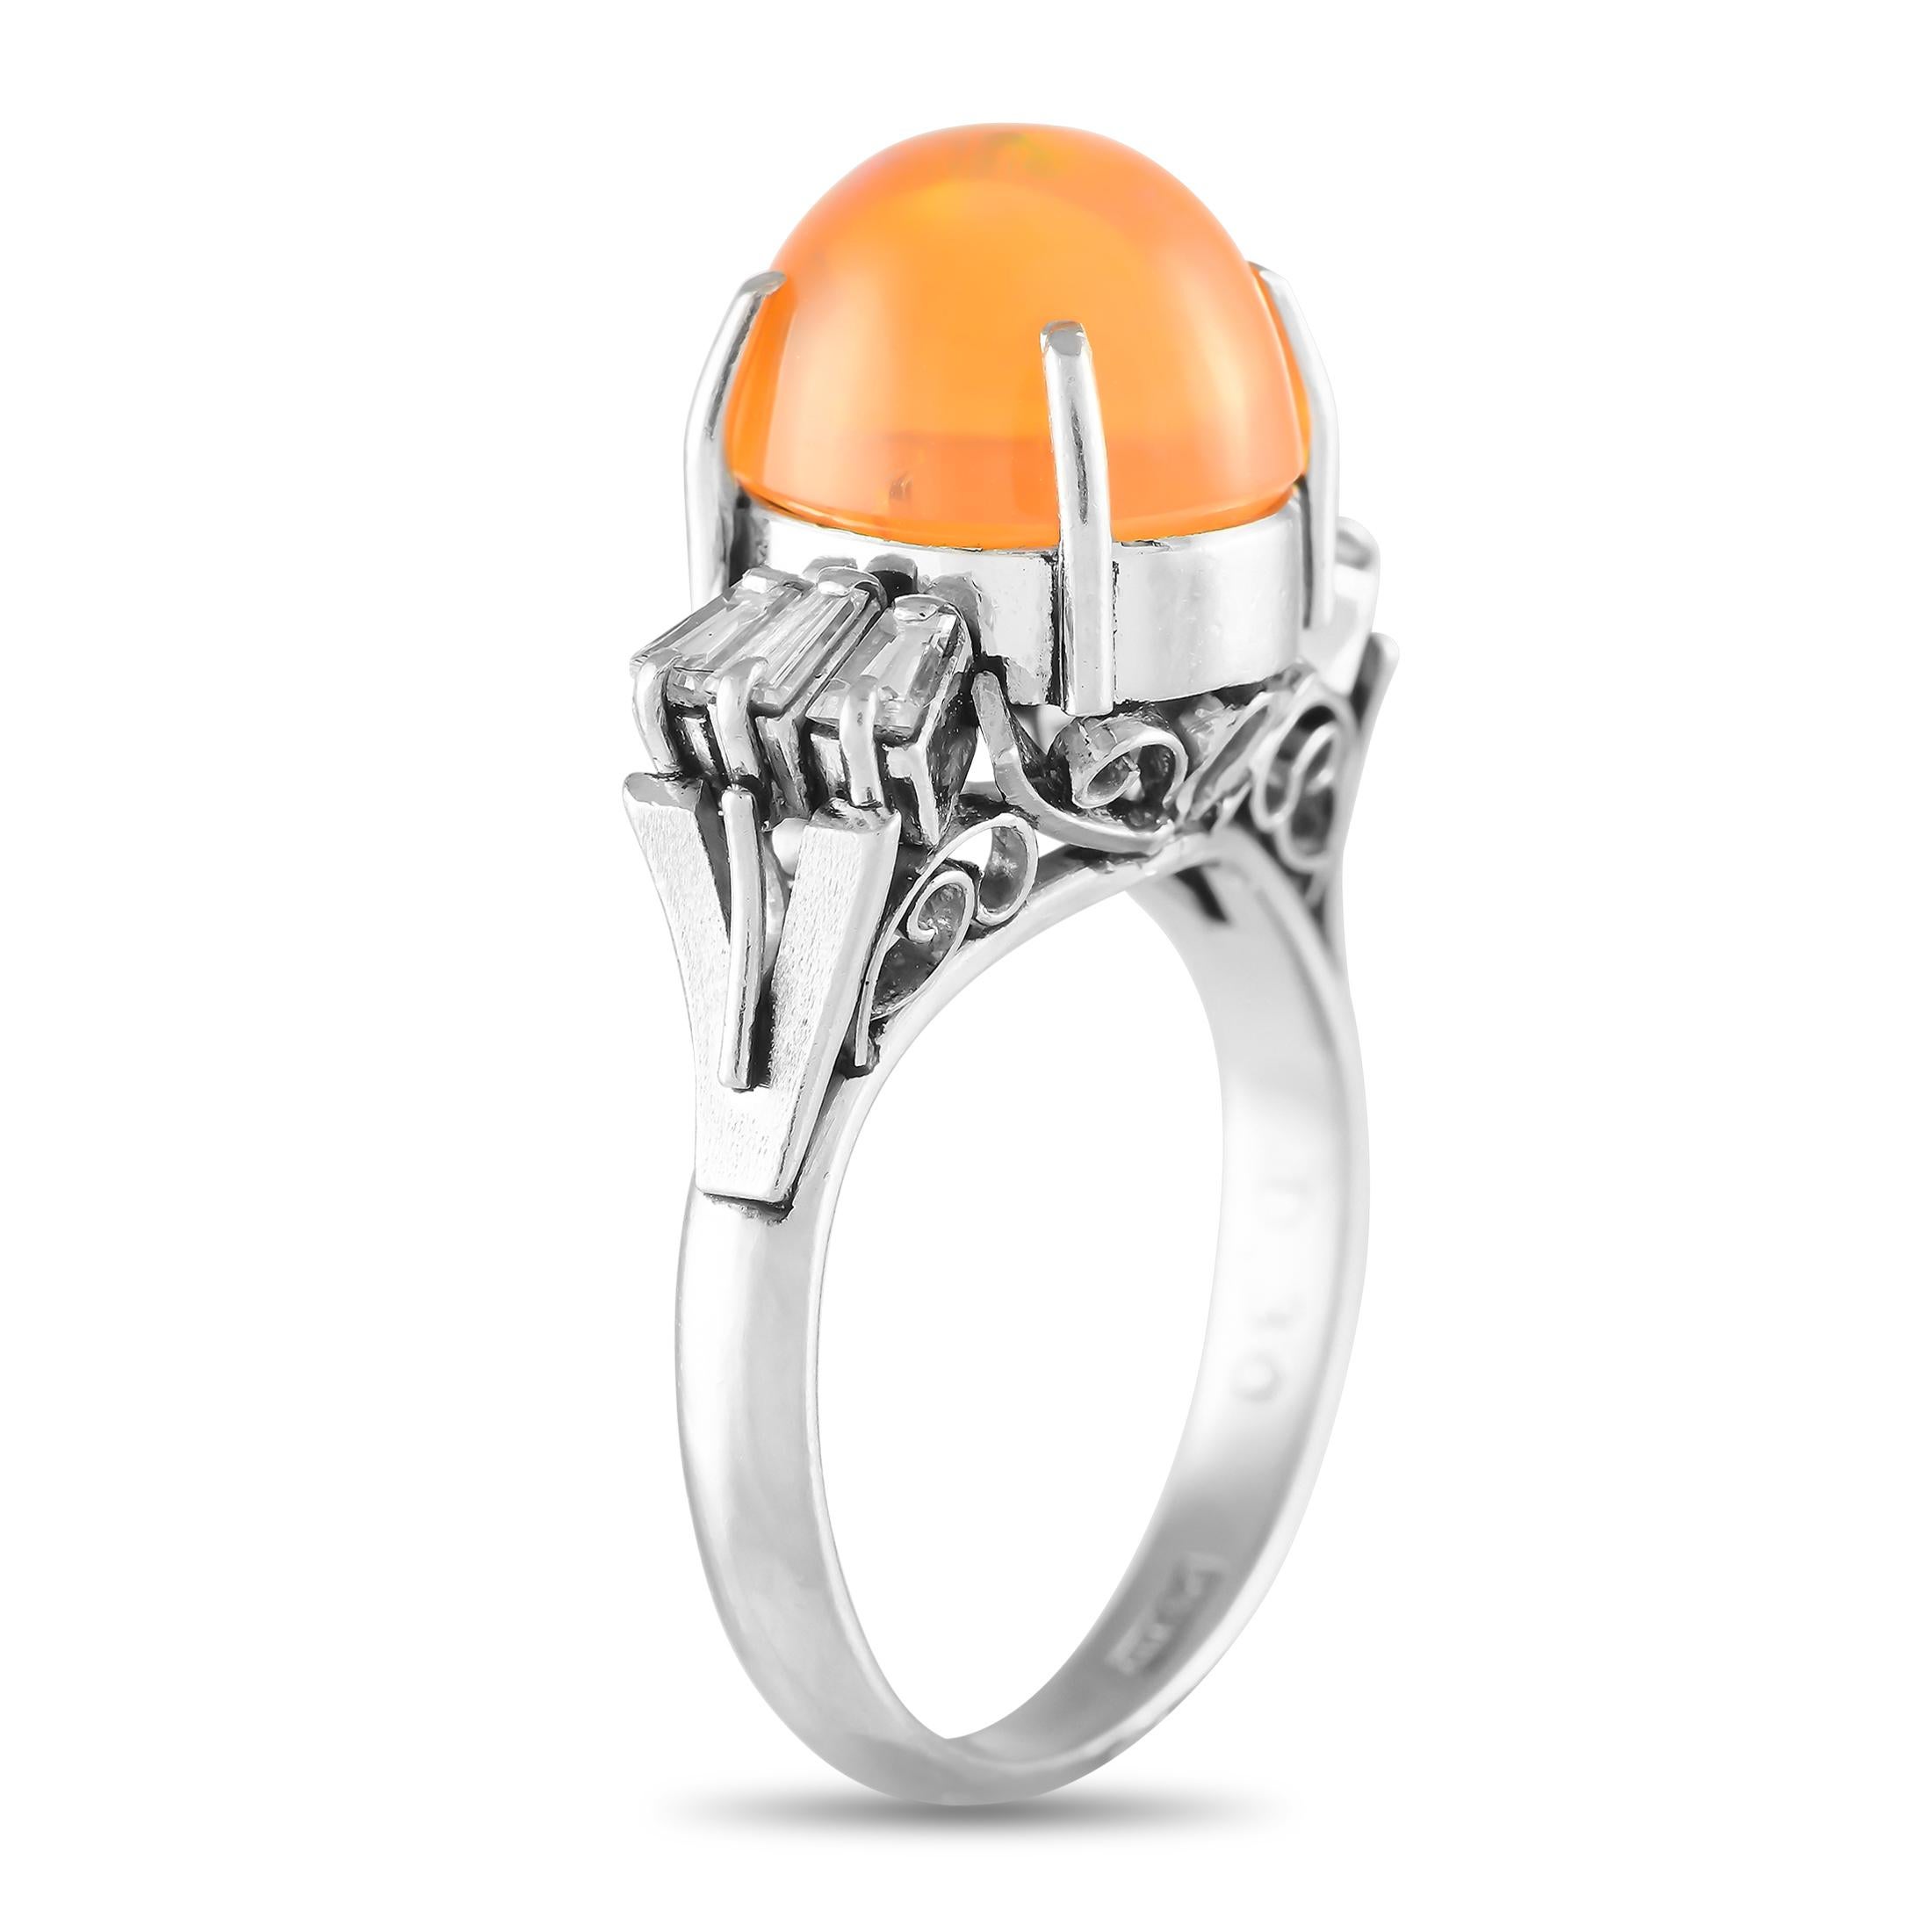 A captivating 3.40 carat fiery orange opal gemstone serves as a stunning focal point on this impressive luxury ring. Diamond baguettes with a total weight of 0.30 carats add extra luxury to the sleek platinum setting. It features a 2mm band width